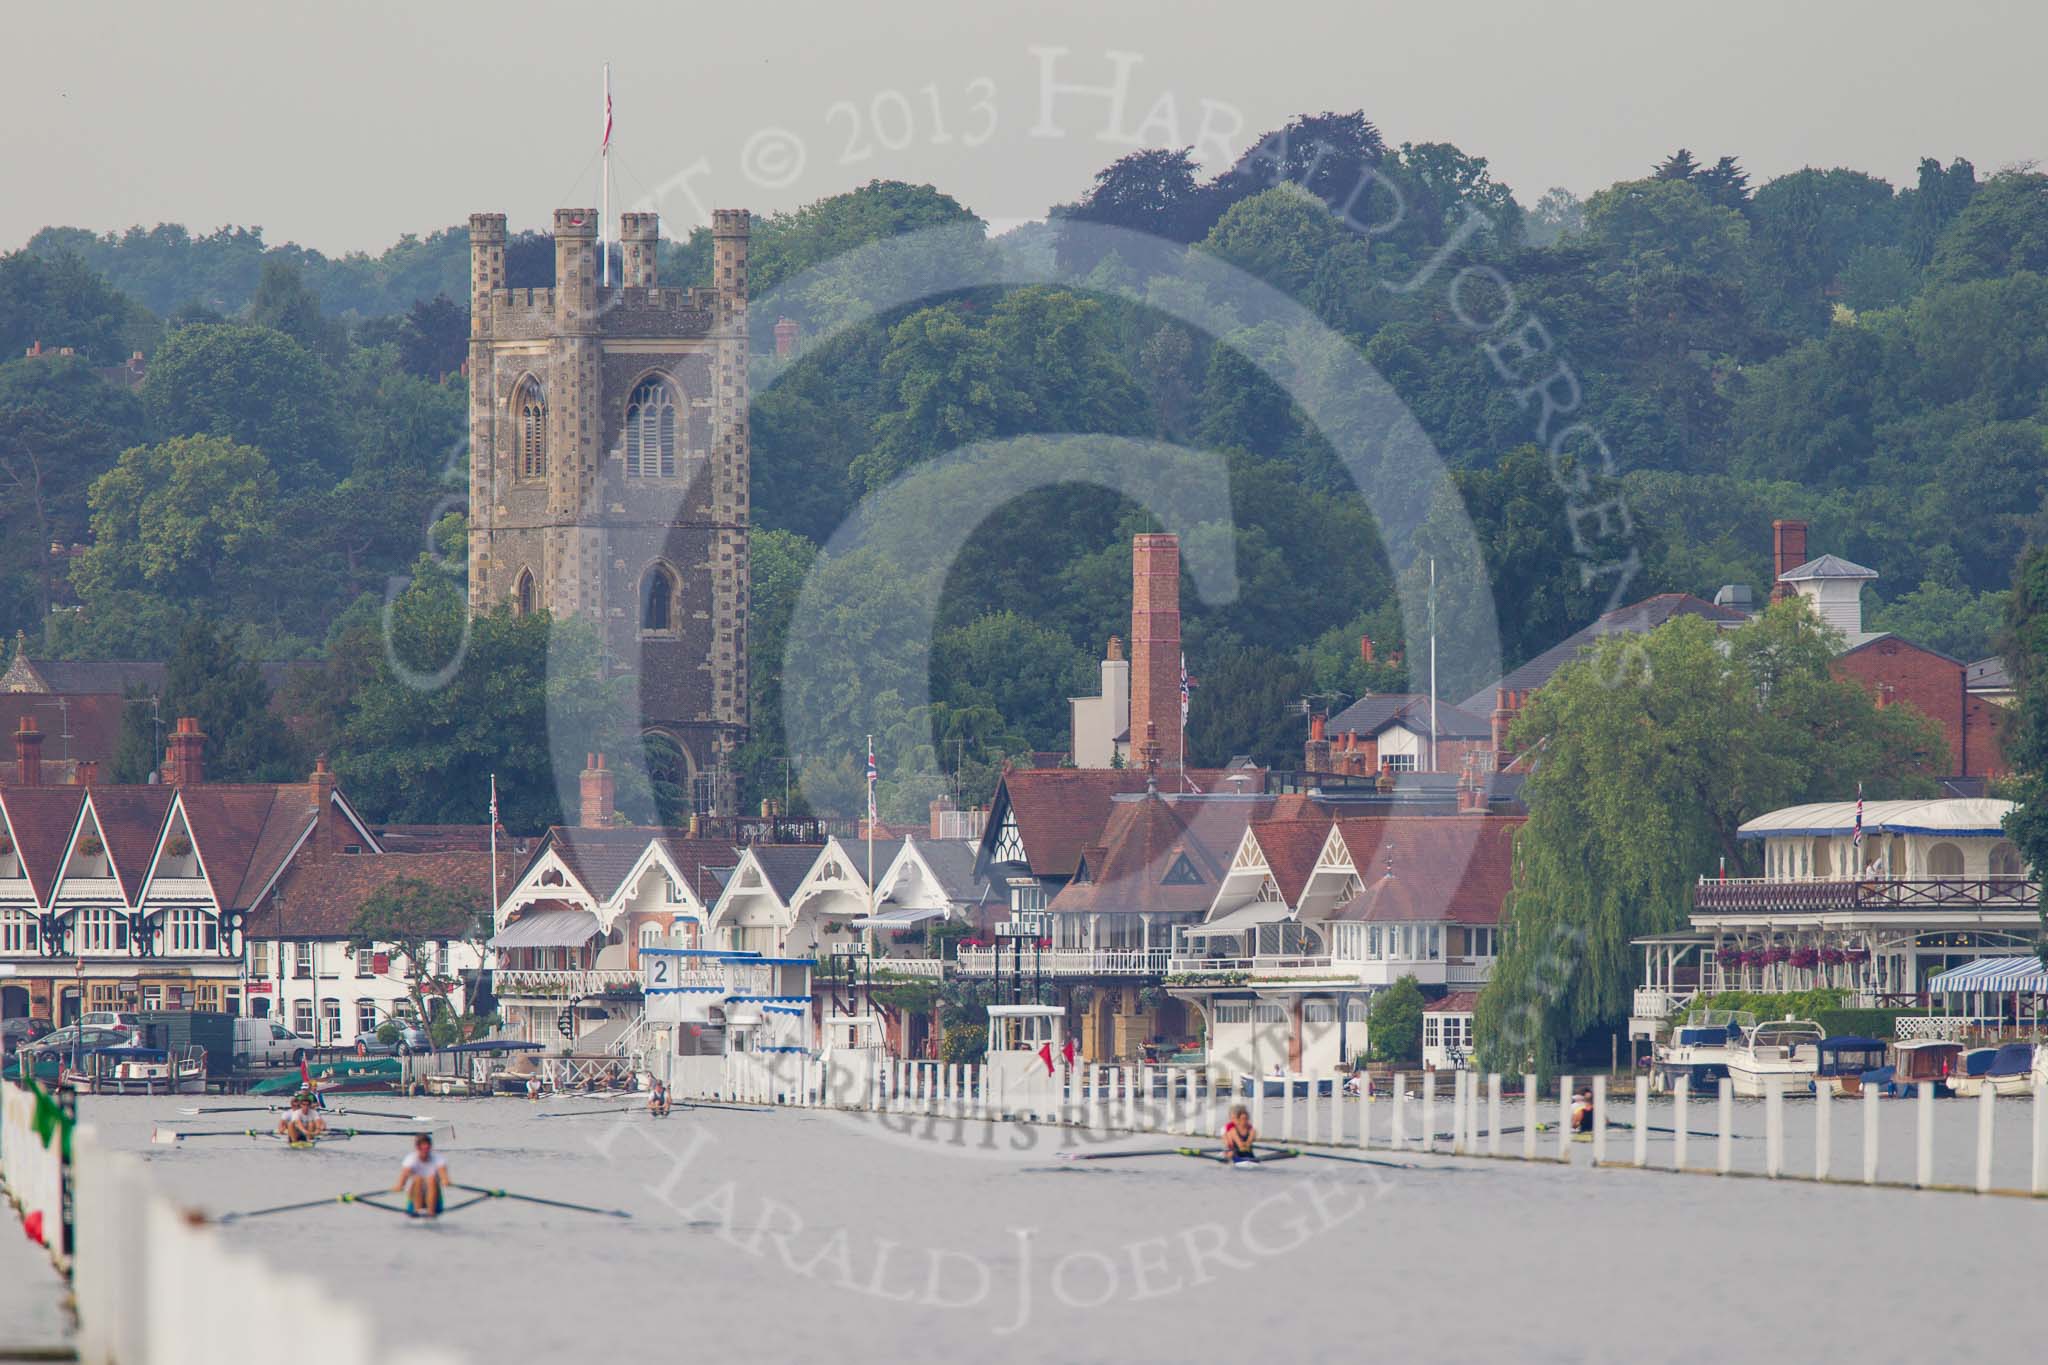 Henley Royal Regatta 2013, Saturday: Henley-on-Thames, with the church of St Mary, seen from .the start of the Henley Royal Regatta race course. Image #3, 06 July 2013 08:36 River Thames, Henley on Thames, UK